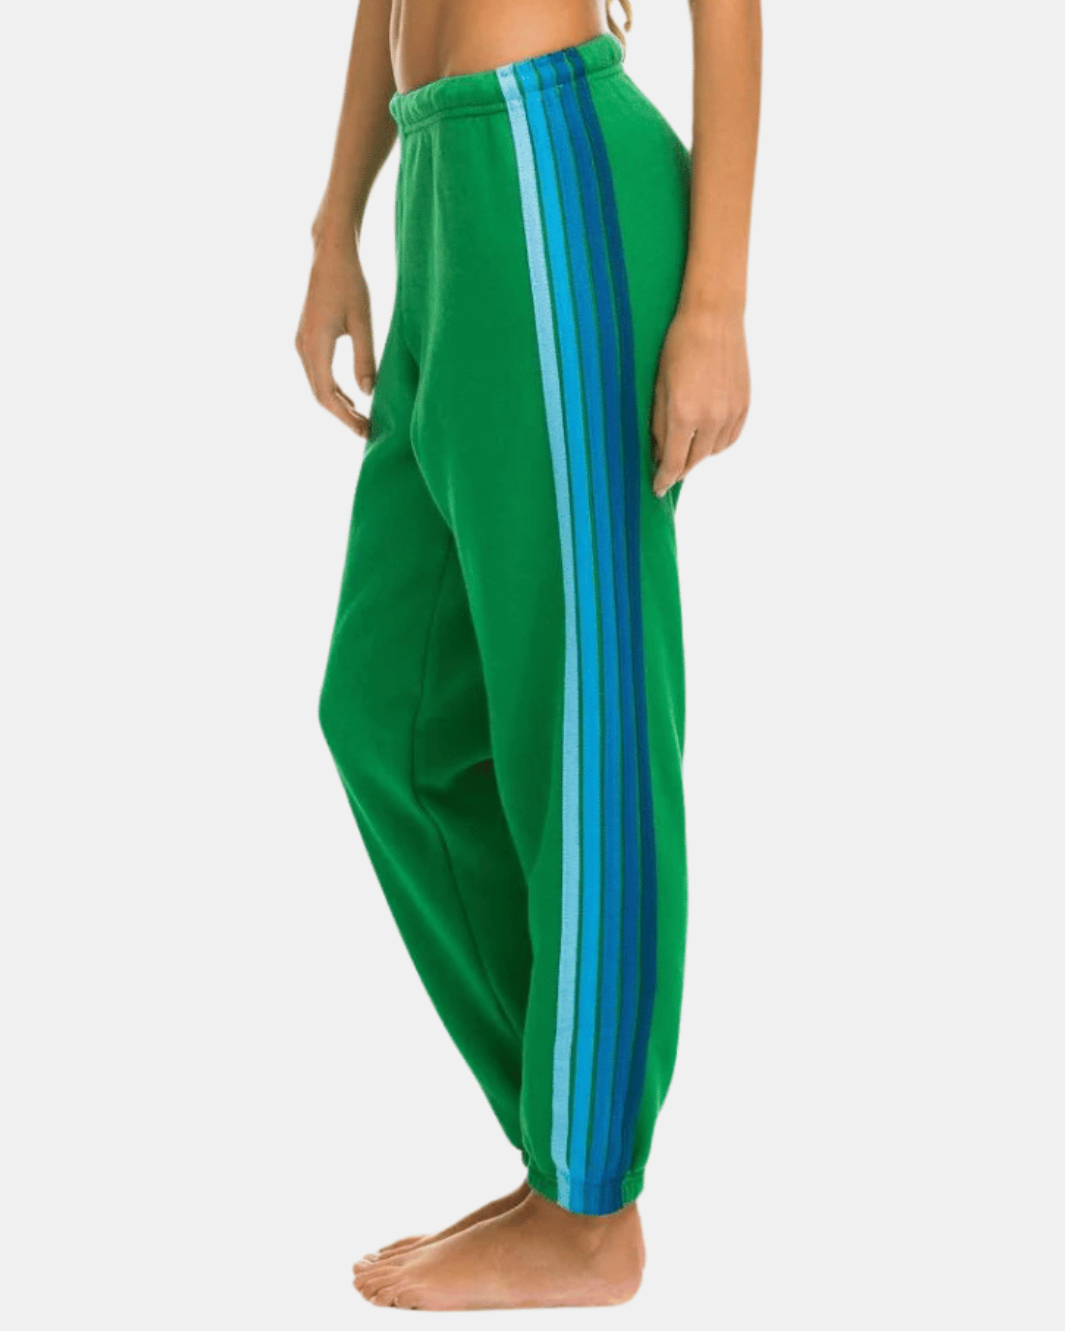 5 STRIPE WOMEN'S SWEATPANT IN KELLY GREEN AND BLUE - Romi Boutique